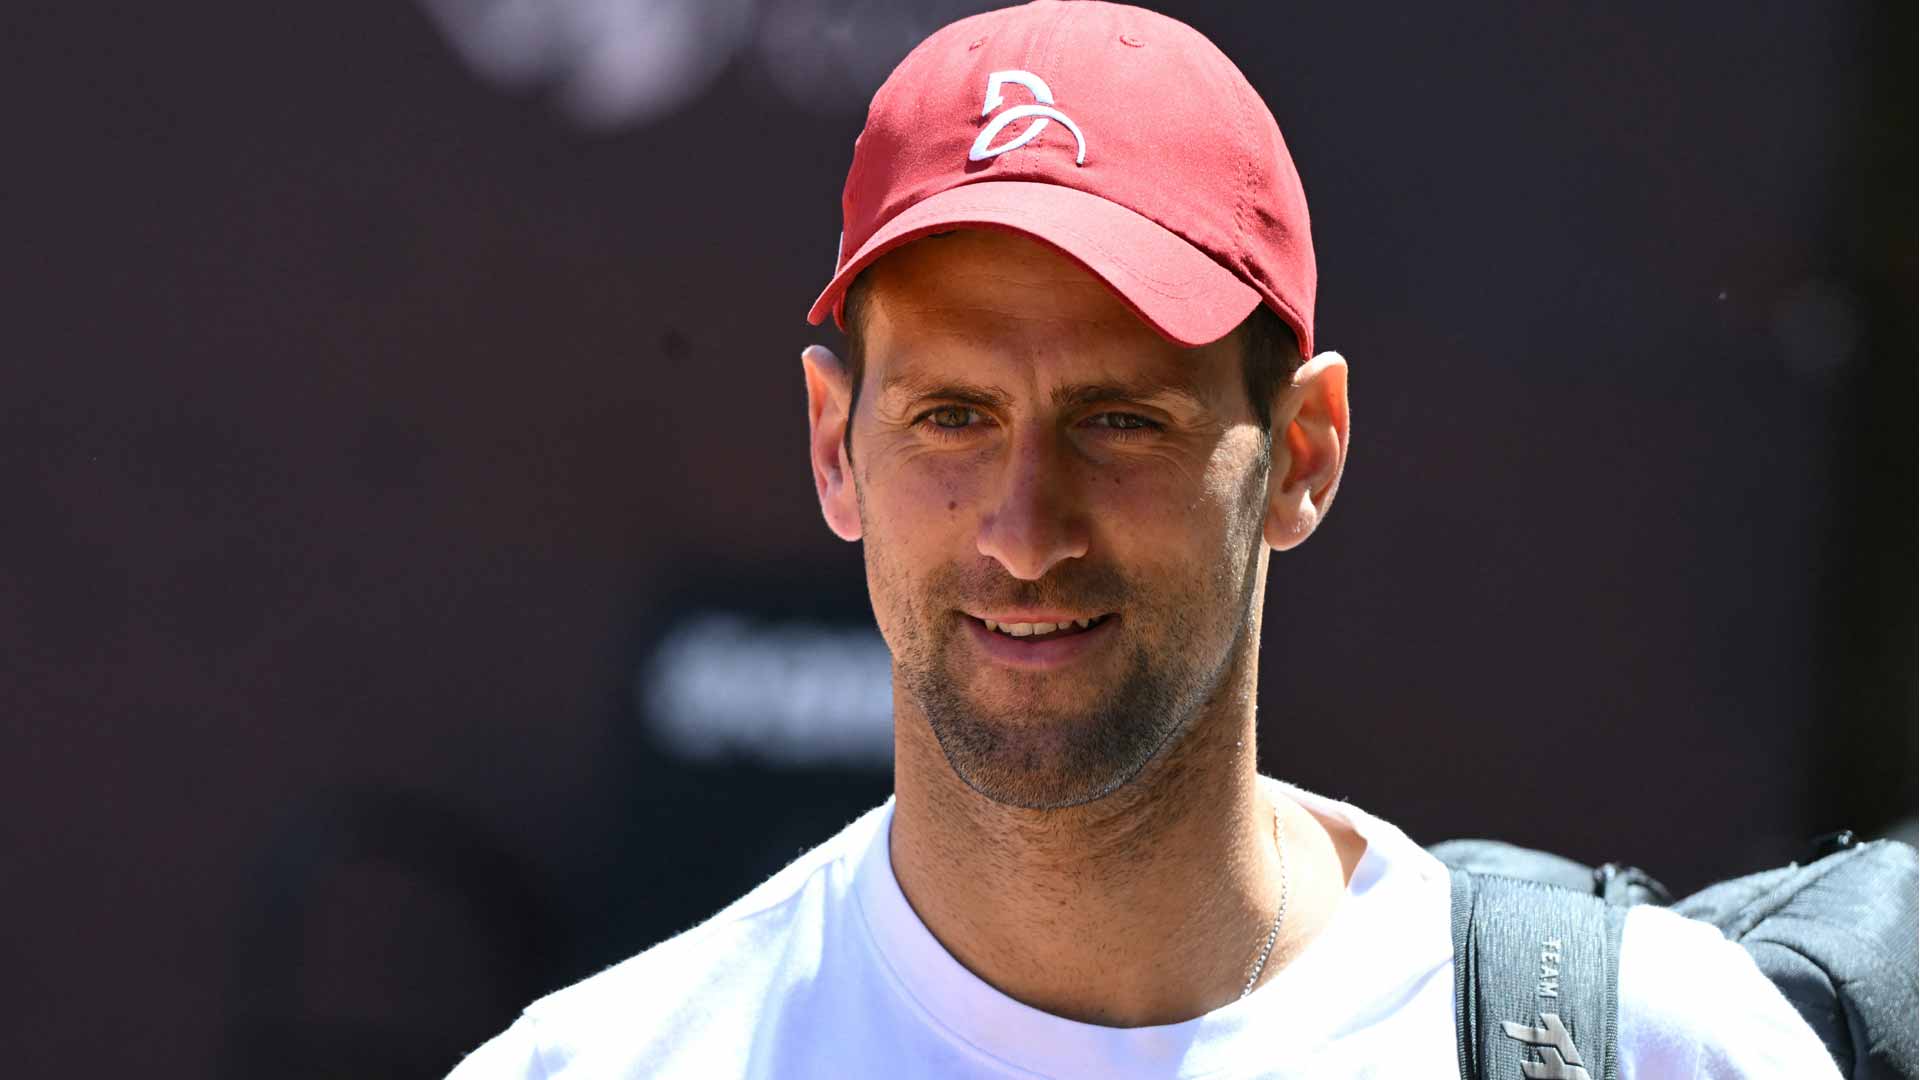 Djokovic makes light of scary incident in Rome